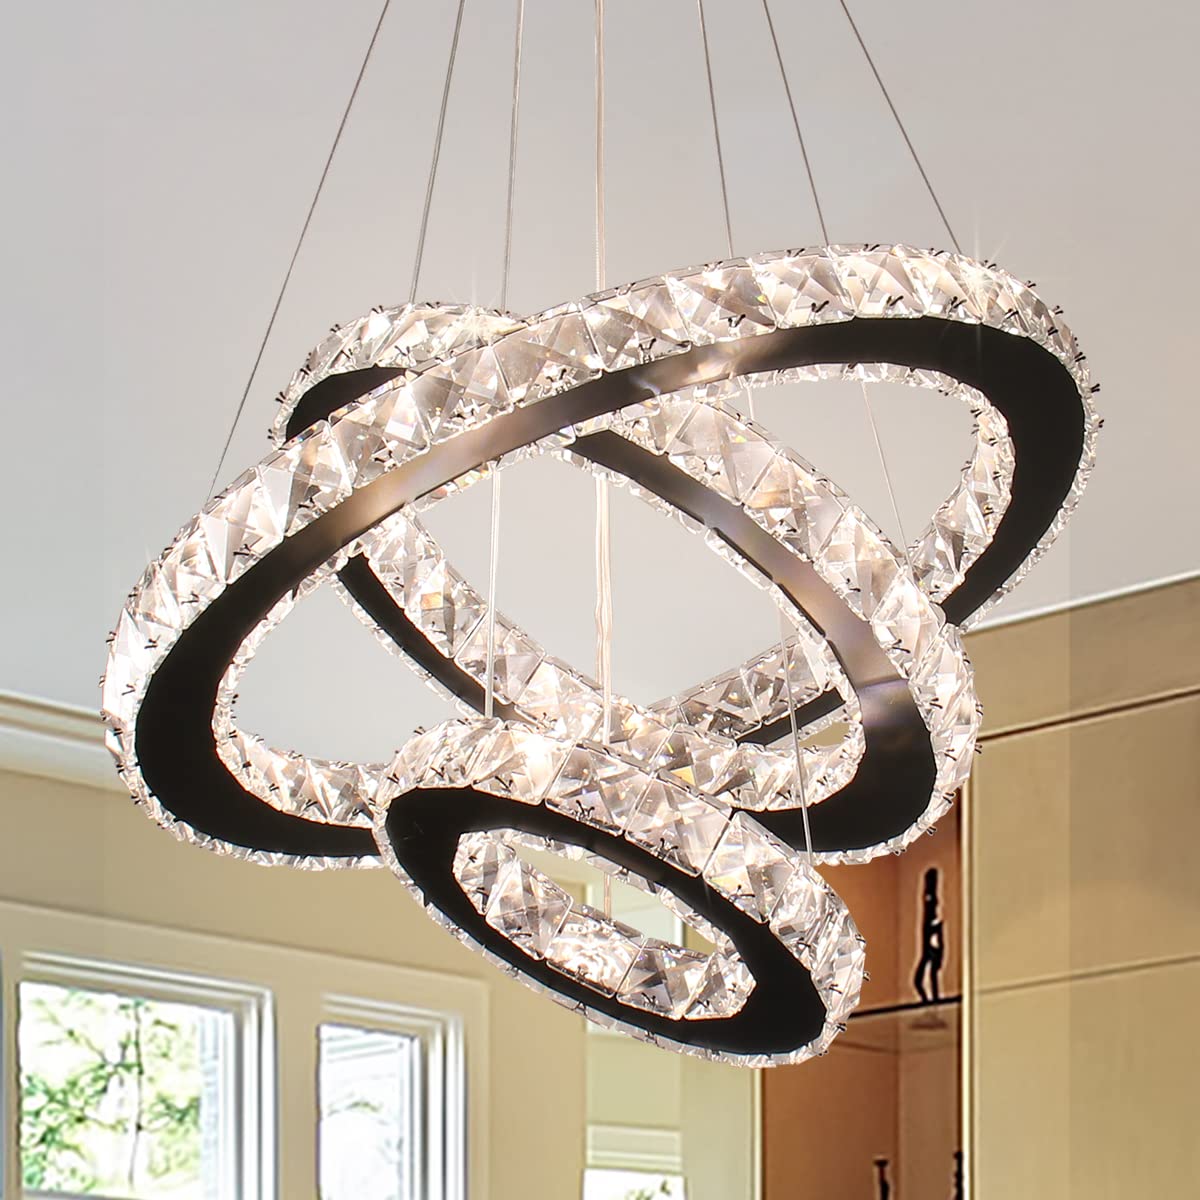 Dimmable Black Modern LED Crystal Chandeliers 3 Rings Pendant Light Adjustable Height Ceiling Lamp for Dinning Room Bedroom Living Room (Dimmable)